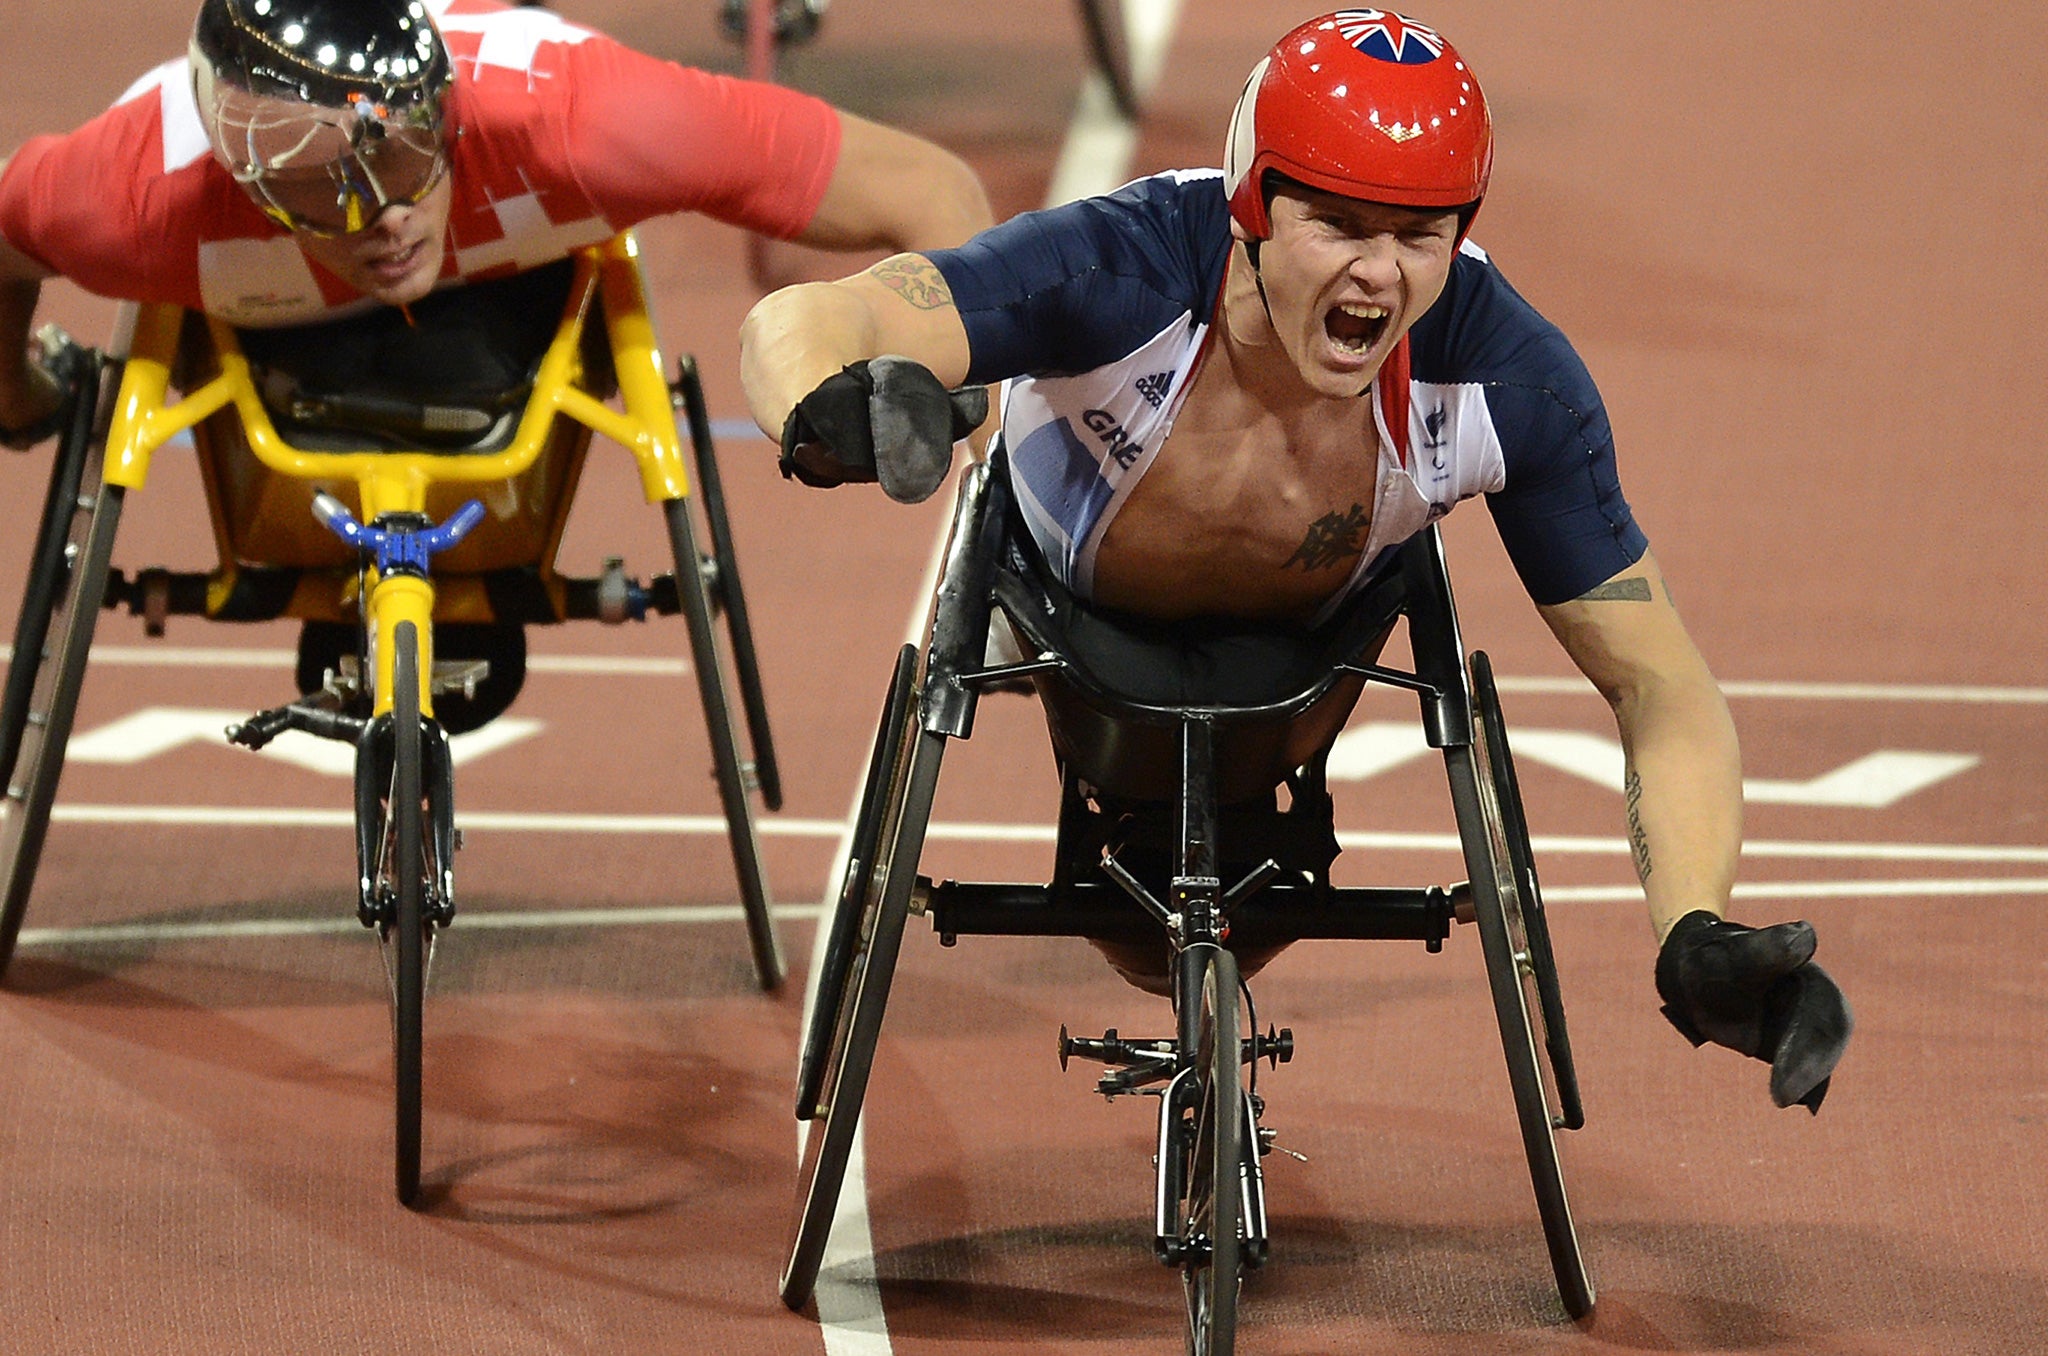 9 September 2012: British Paralympian David Weir made it four wins from four events at London 2012. The 33-year-old also won the 5,000m, 1500m and 800m, matching Sarah Storey as Britain's most successful athlete at the Games.